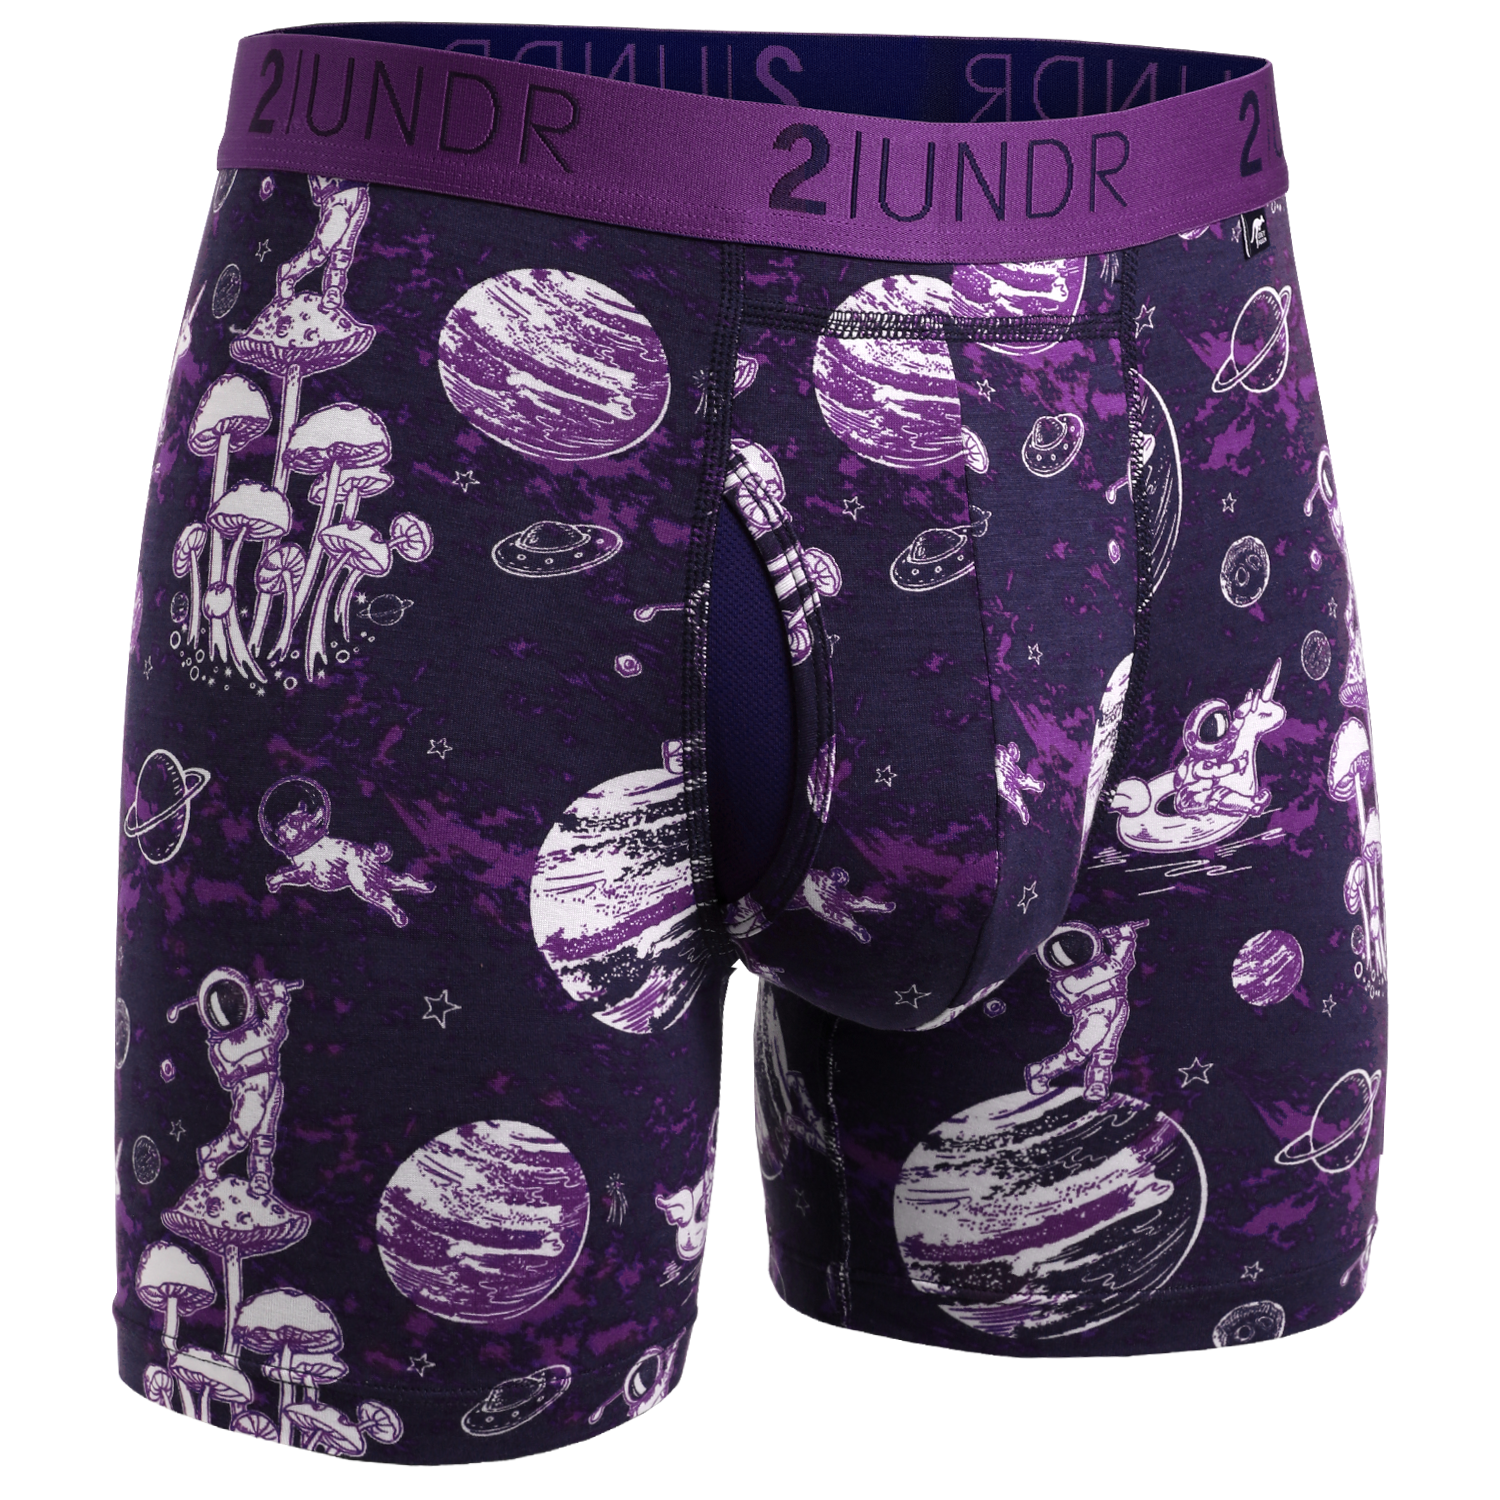 Swing Shift Boxer Brief - Space Golf Navy – 2UNDR